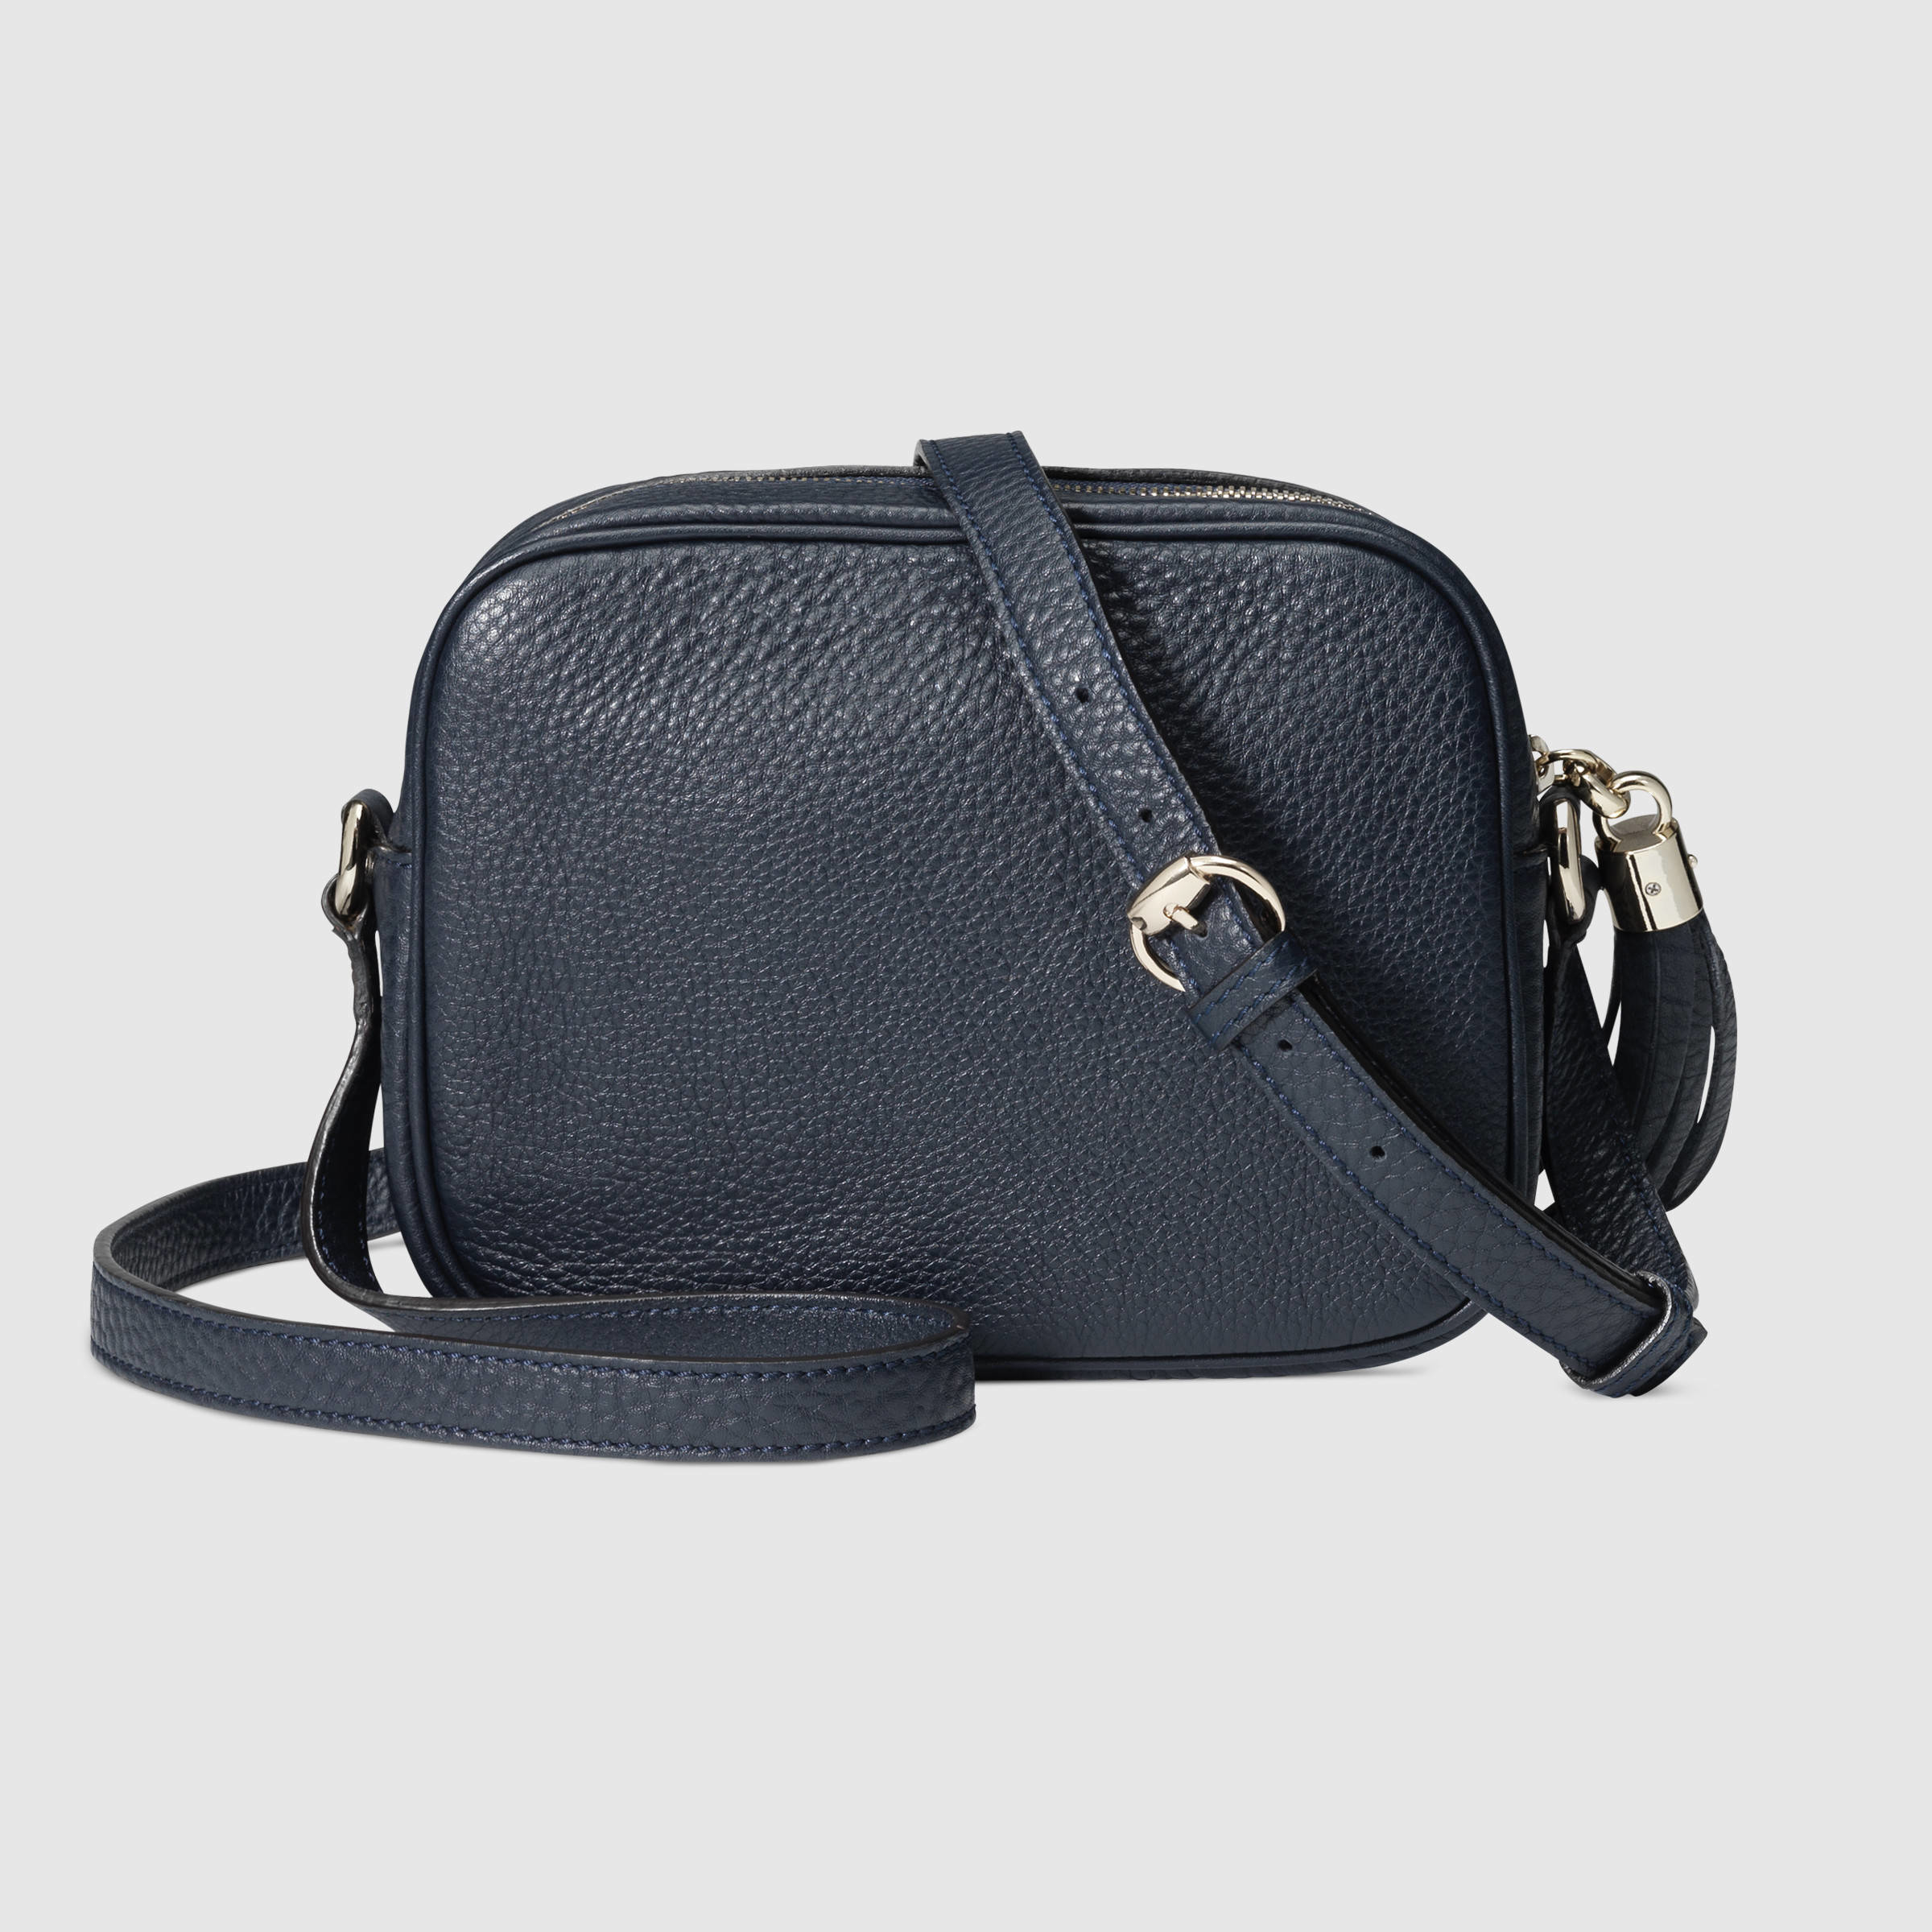 Lyst - Gucci Soho Leather Disco Bag in Blue